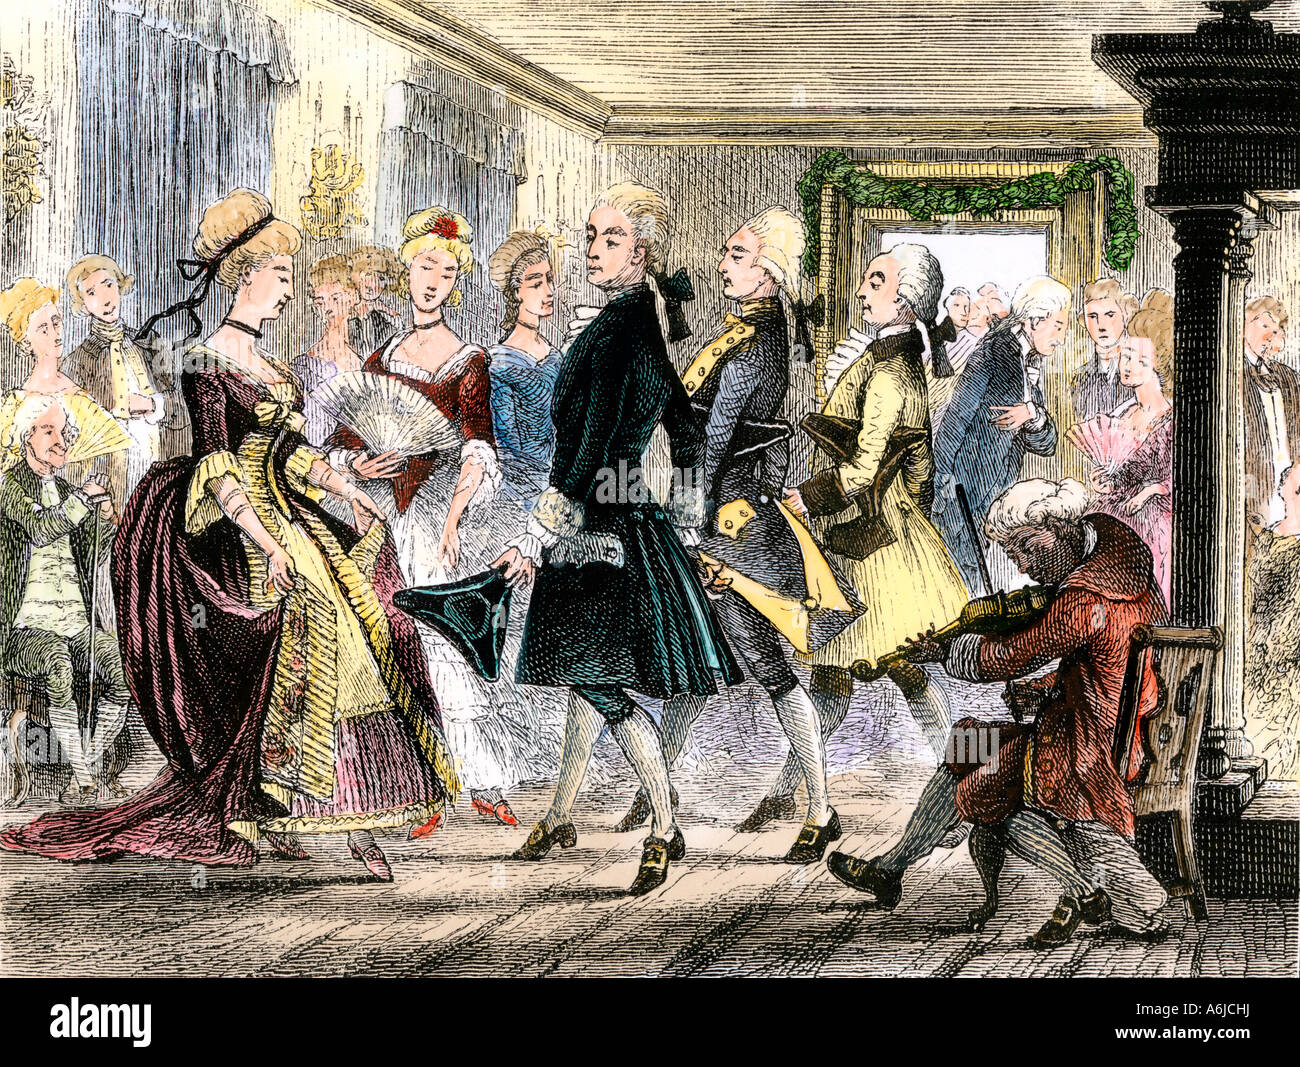 Colonial couples at a ballroom dance 1700s. Hand-colored woodcut Stock Photo